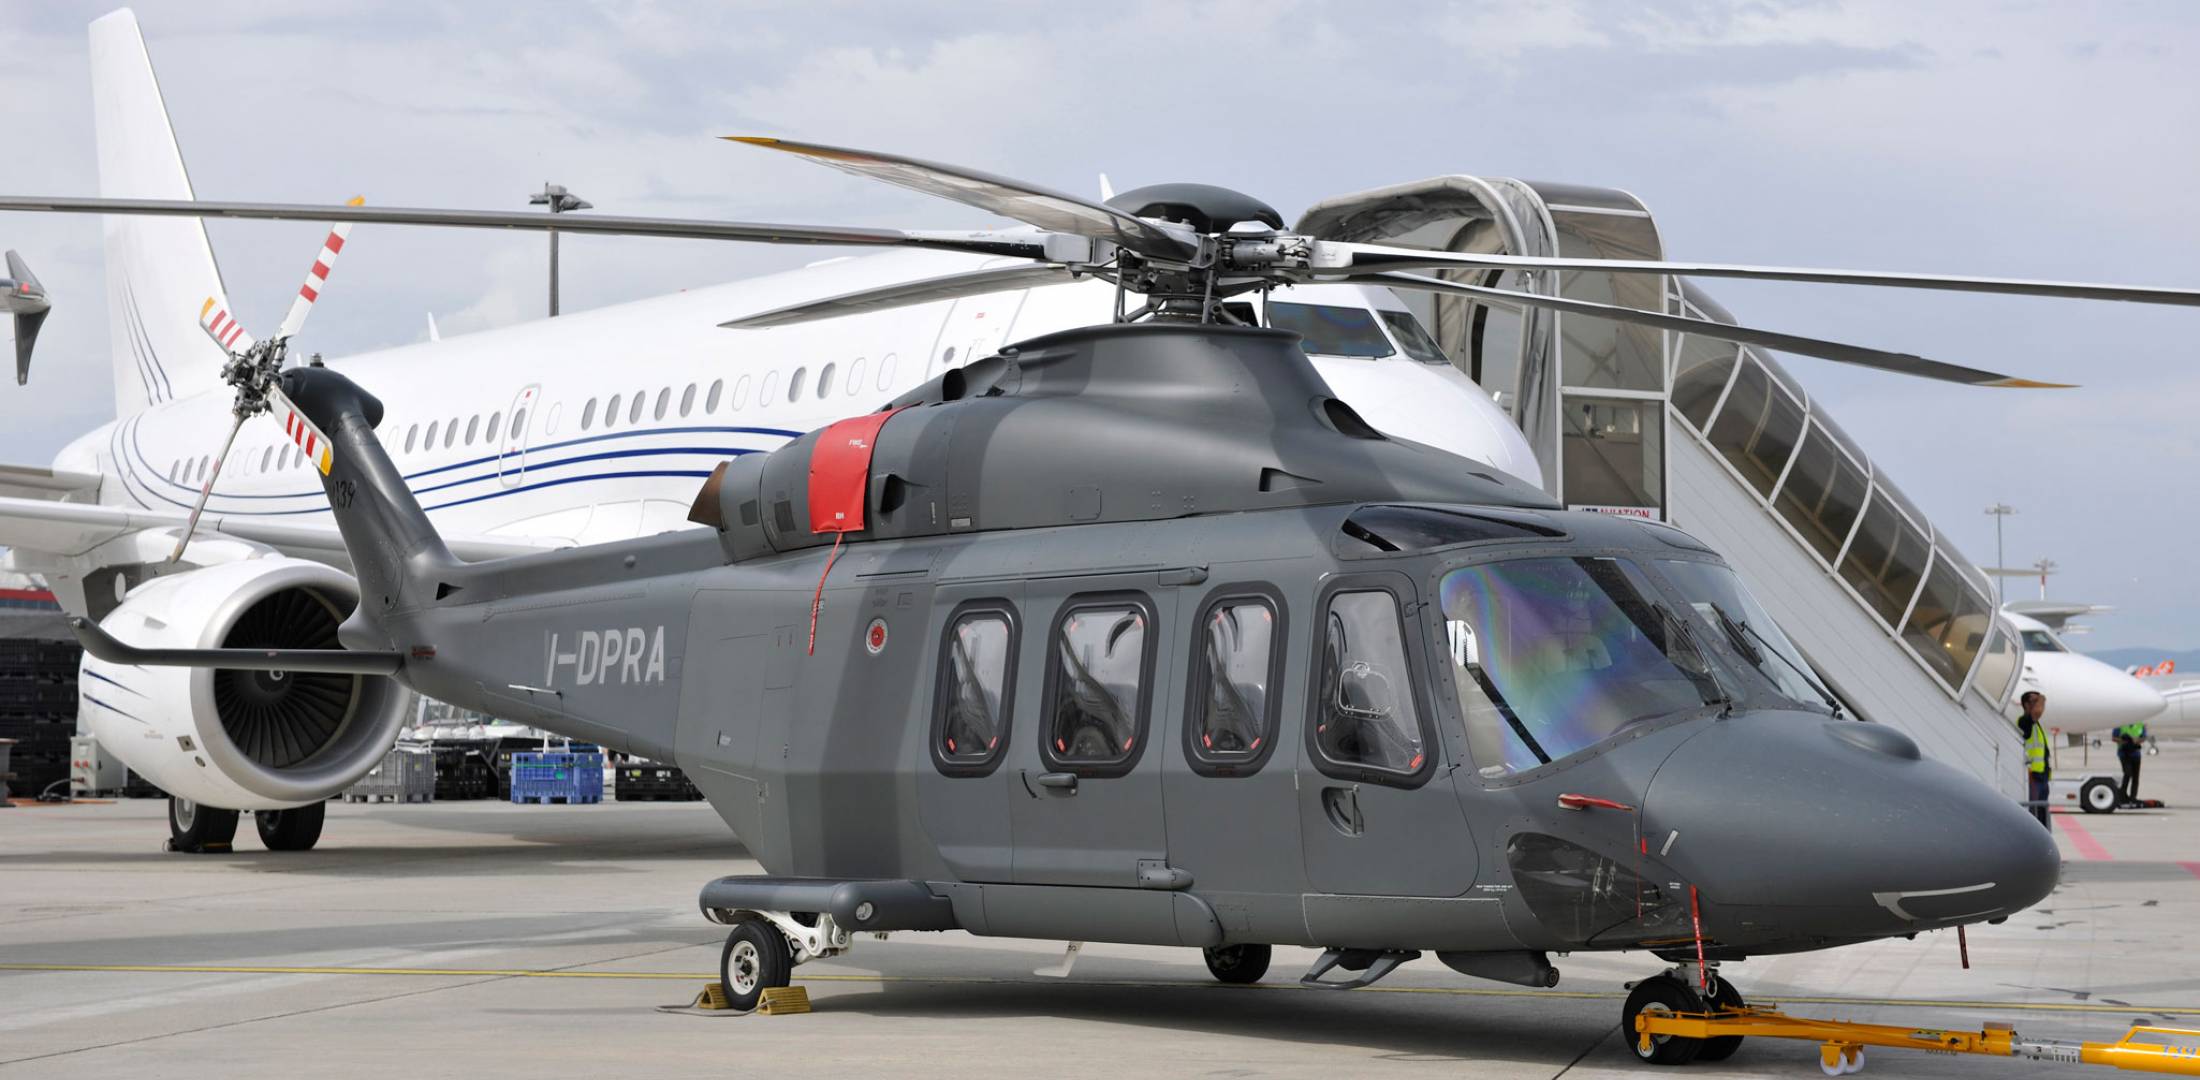 Leonardo Helicopters Logo - Leonardo Helicopters Sees Solid Growth in Europe. Business Aviation